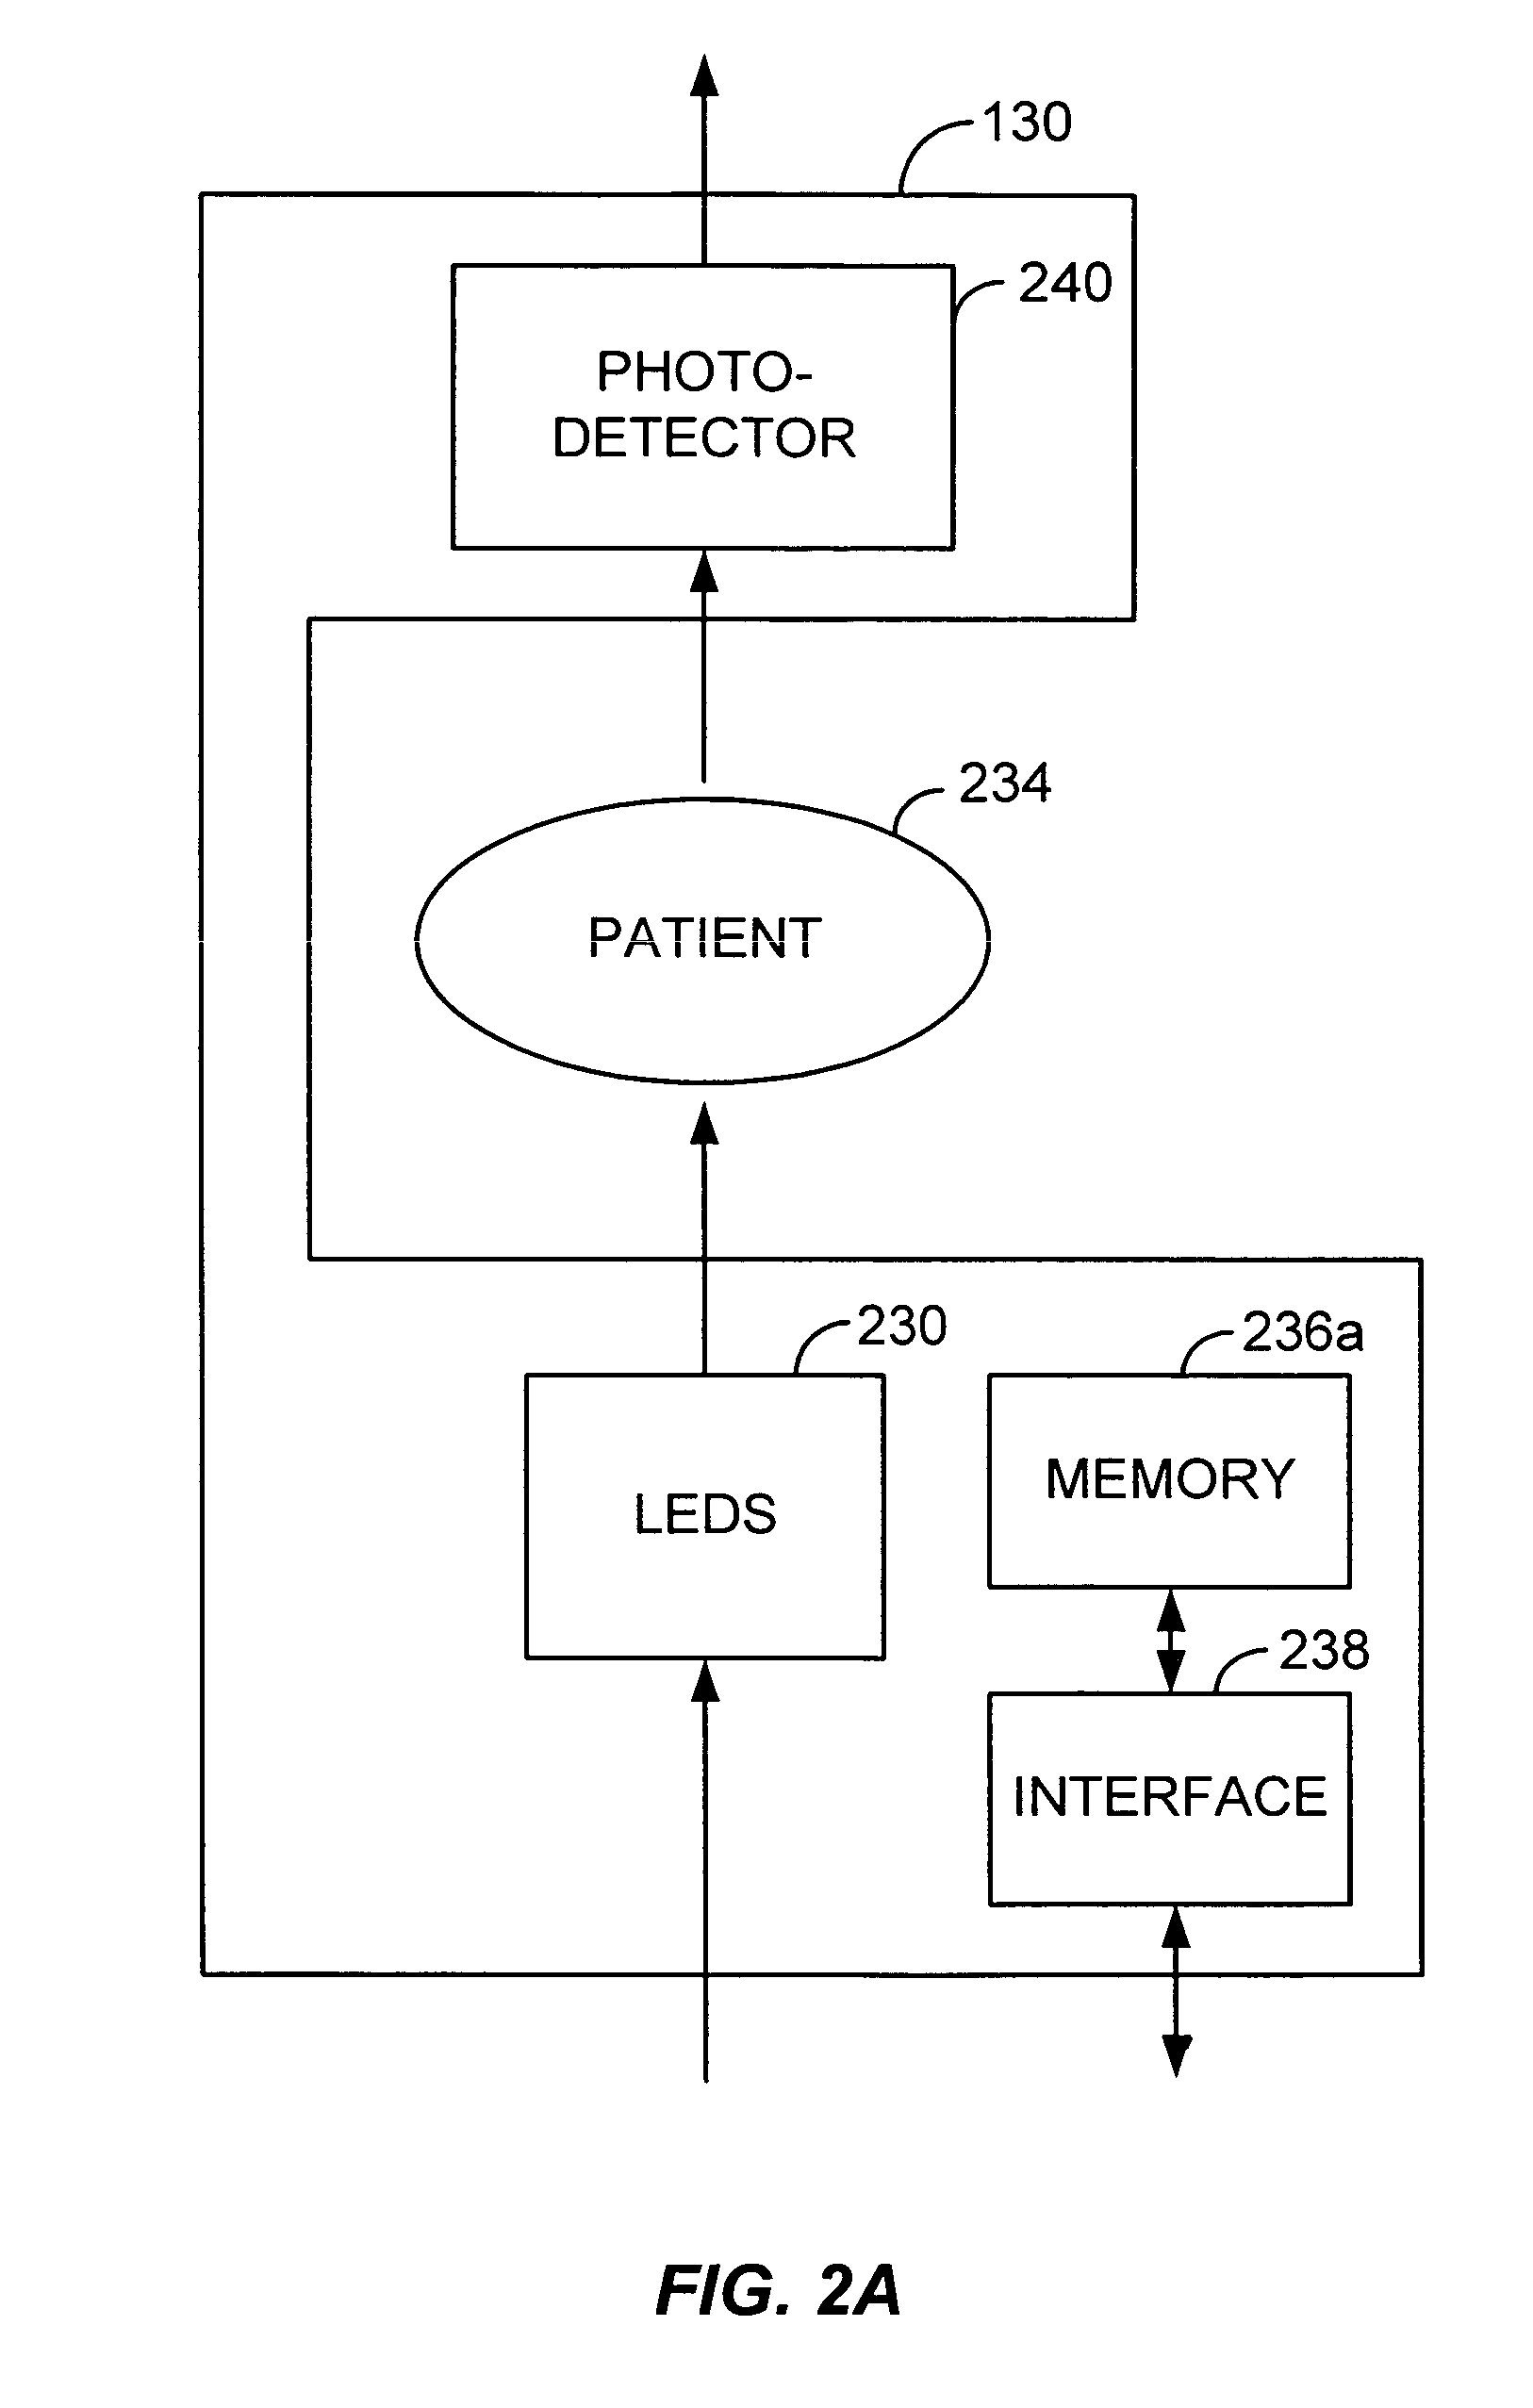 Method and circuit for indicating quality and accuracy of physiological measurements